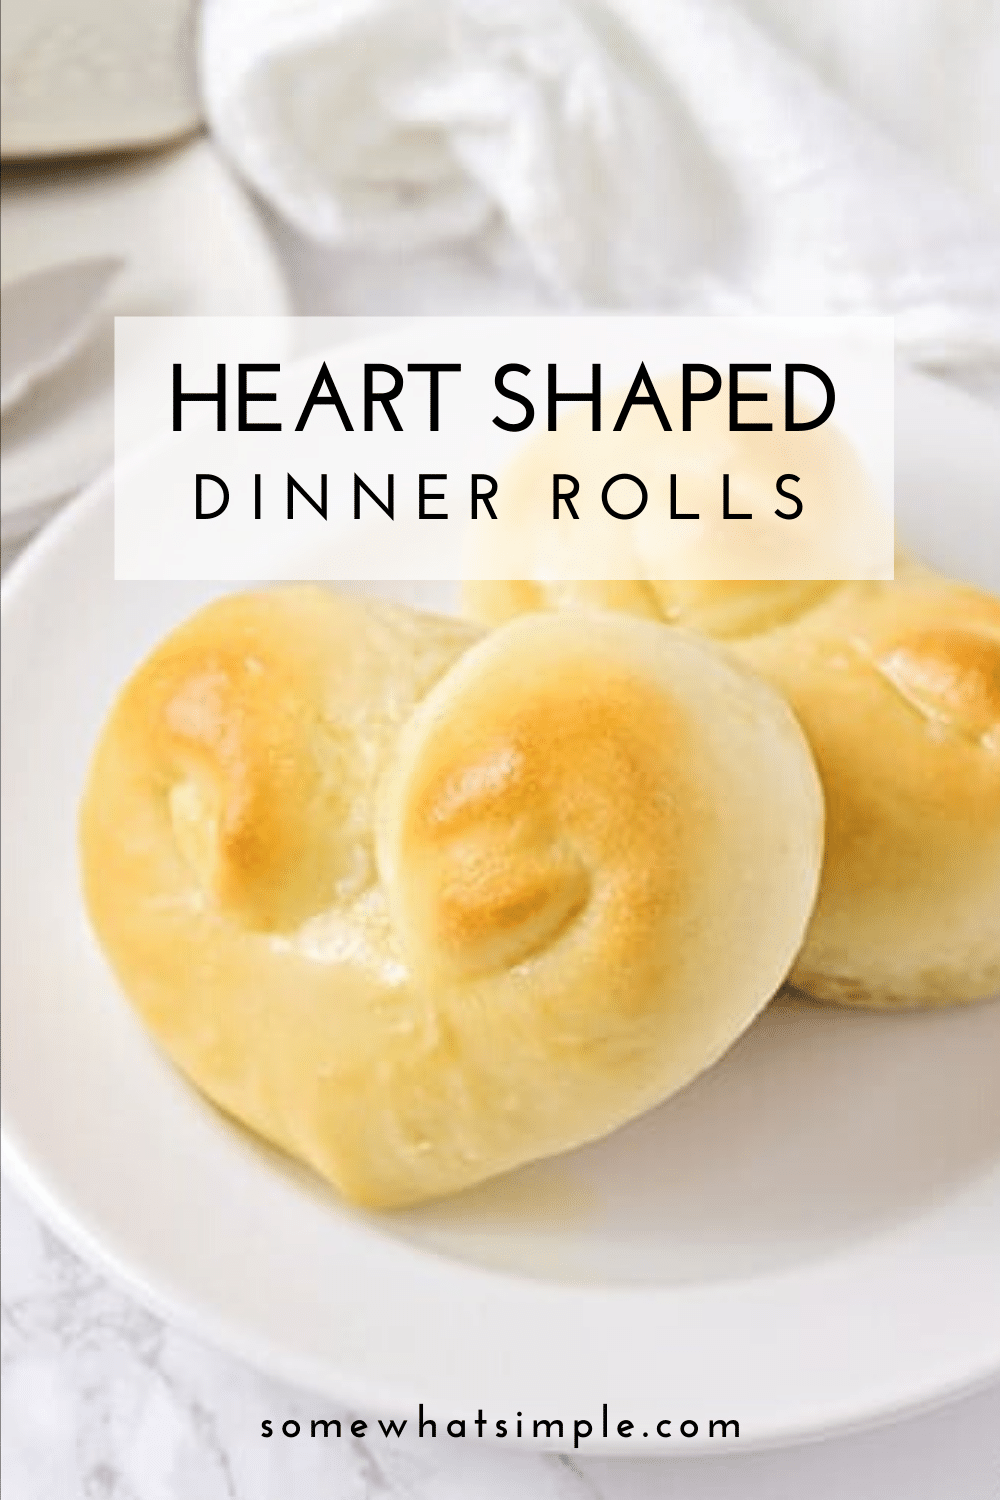 Heart Shaped Dinner Rolls - Somewhat Simple